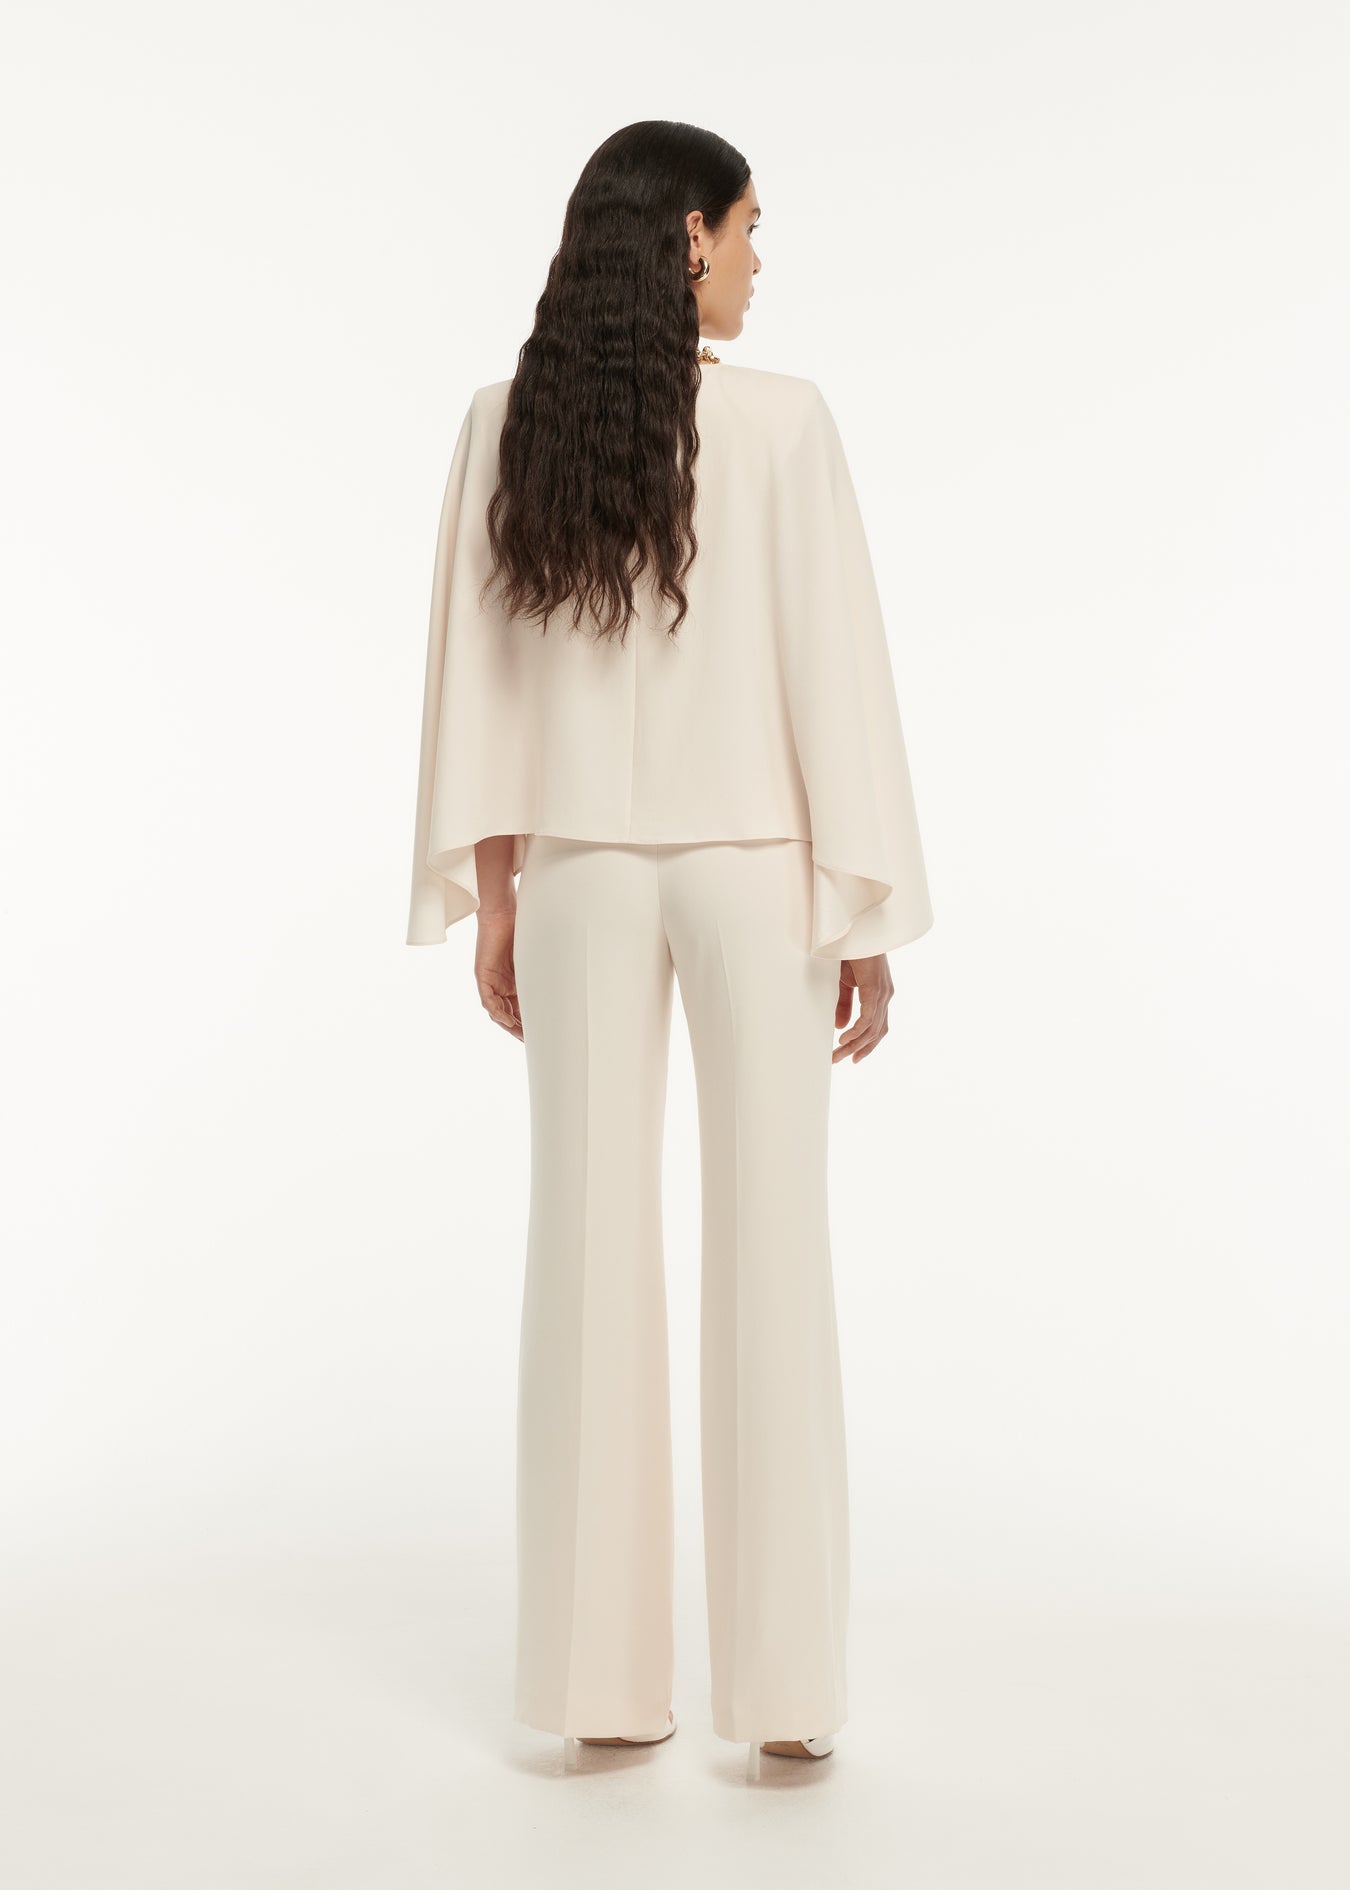 The back of a woman wearing the Long Sleeve Satin Crepe Top